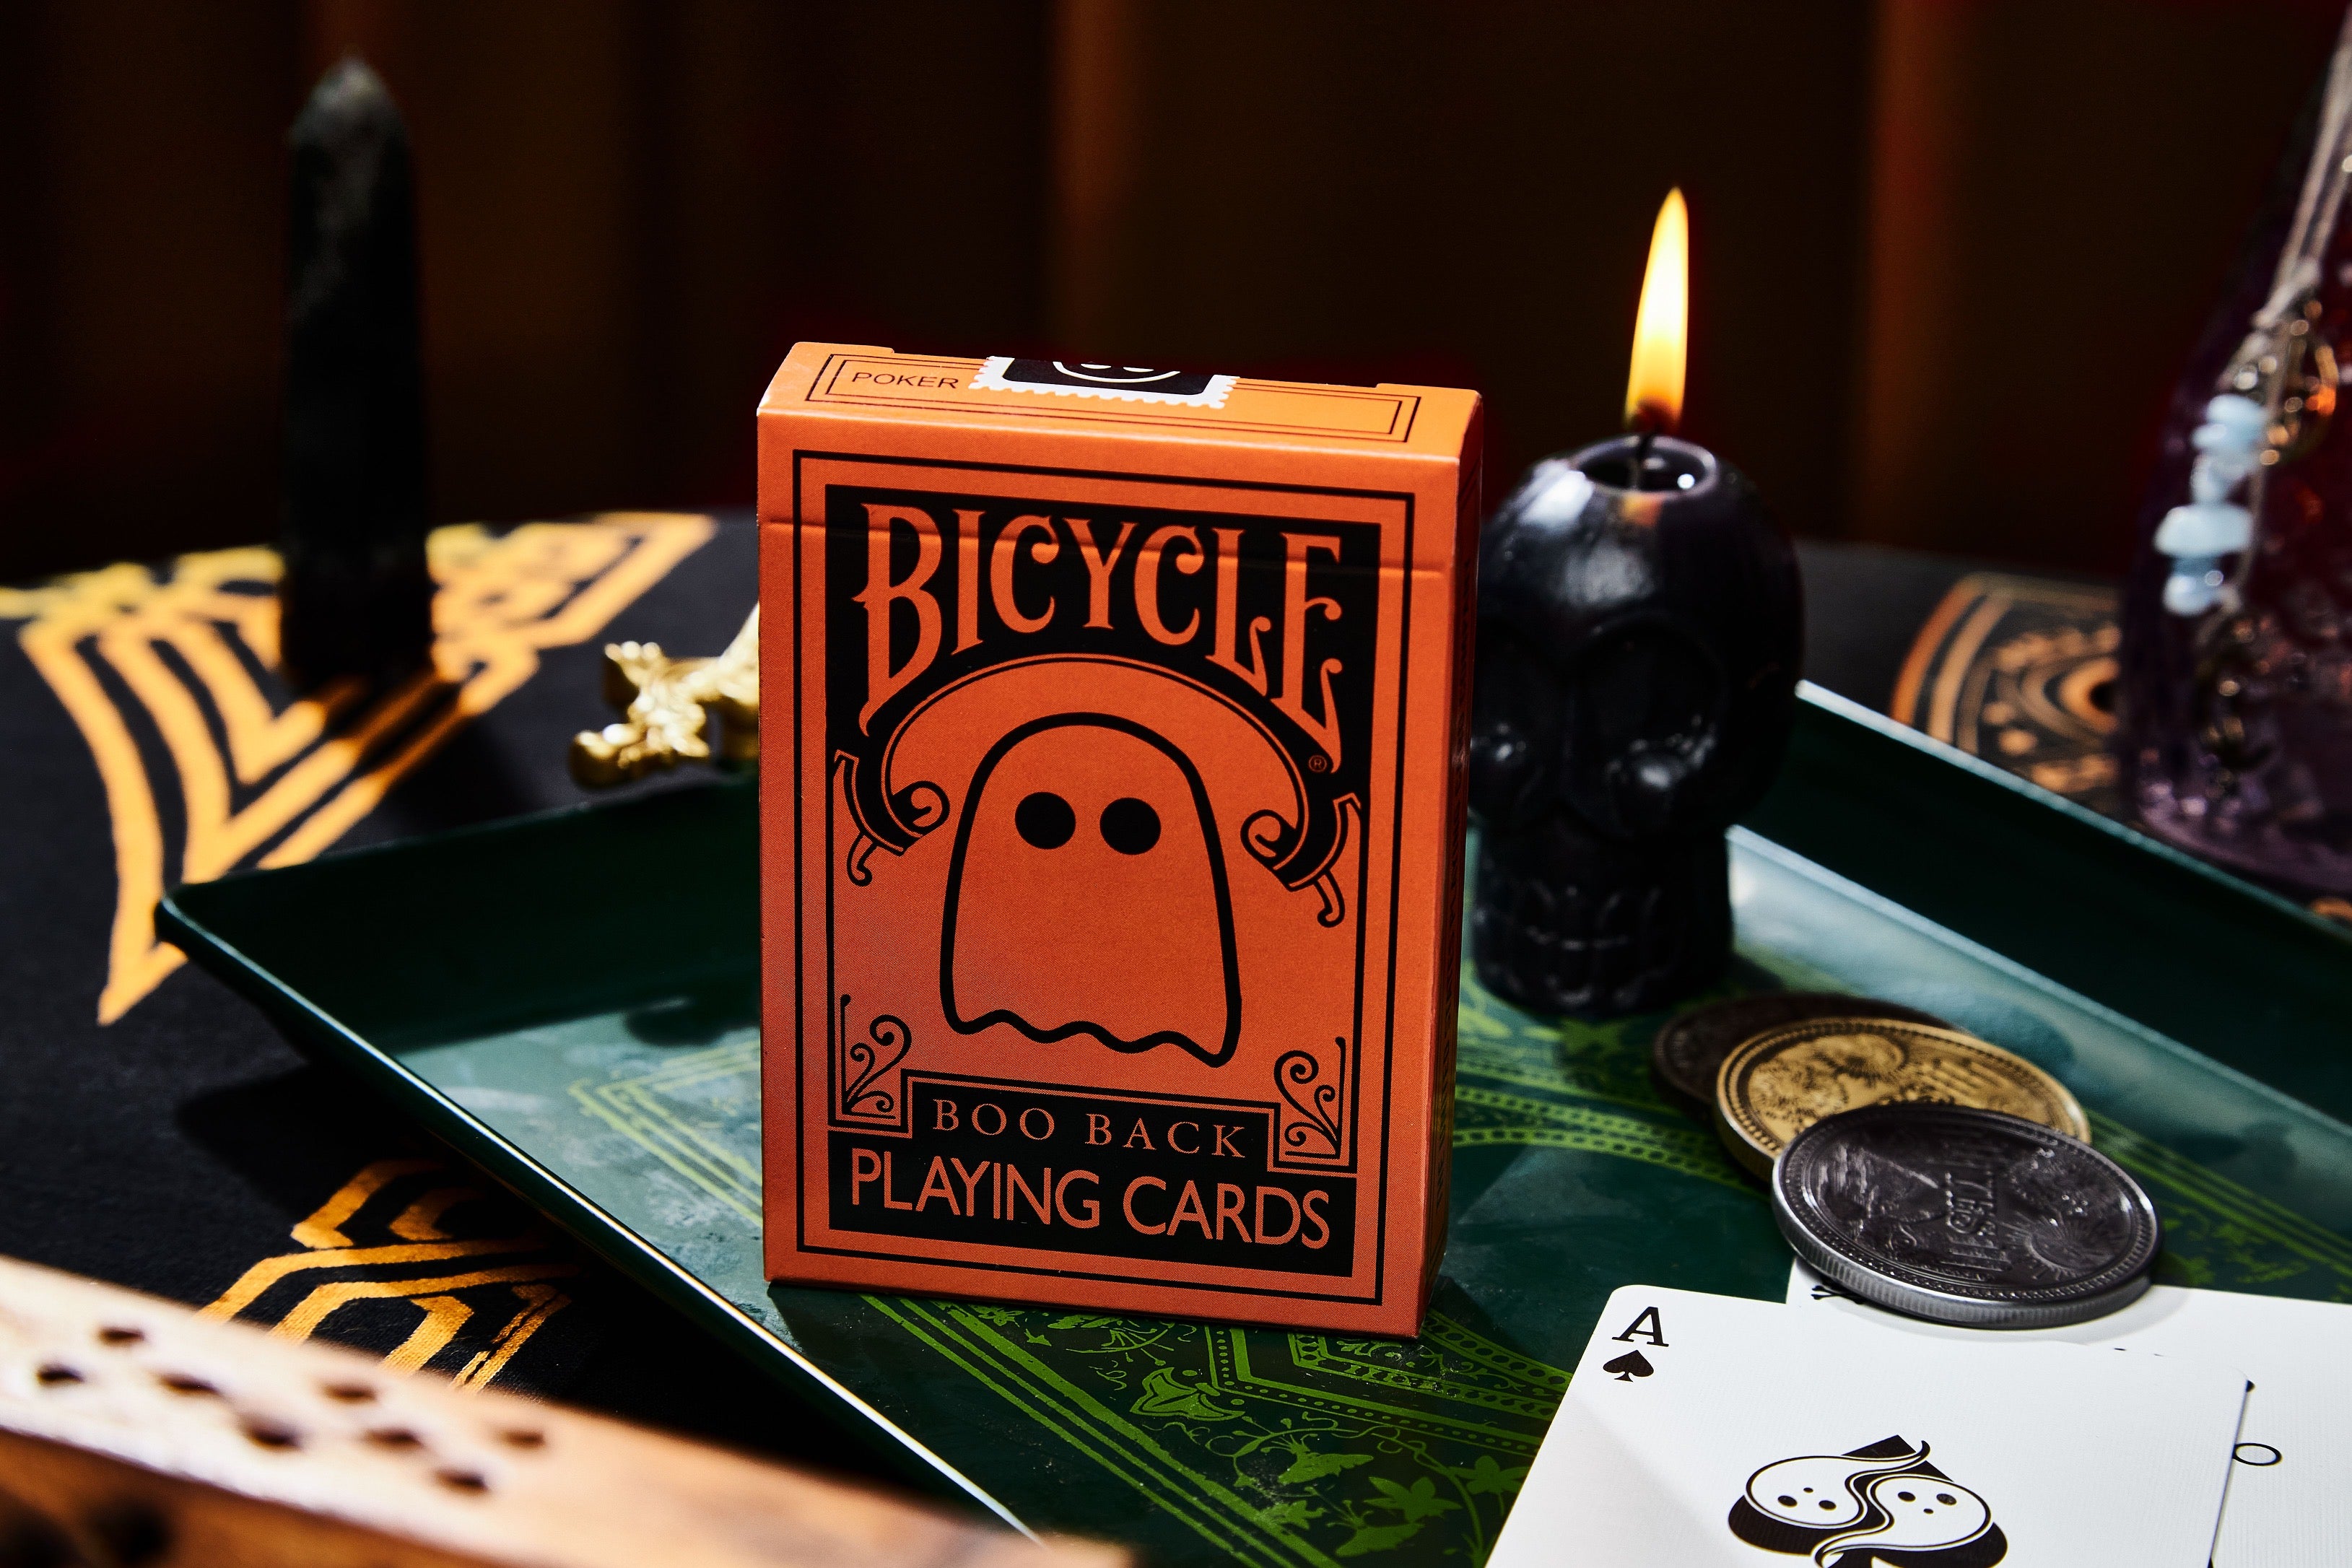 Bicycle Boo Backs by The Card Firm